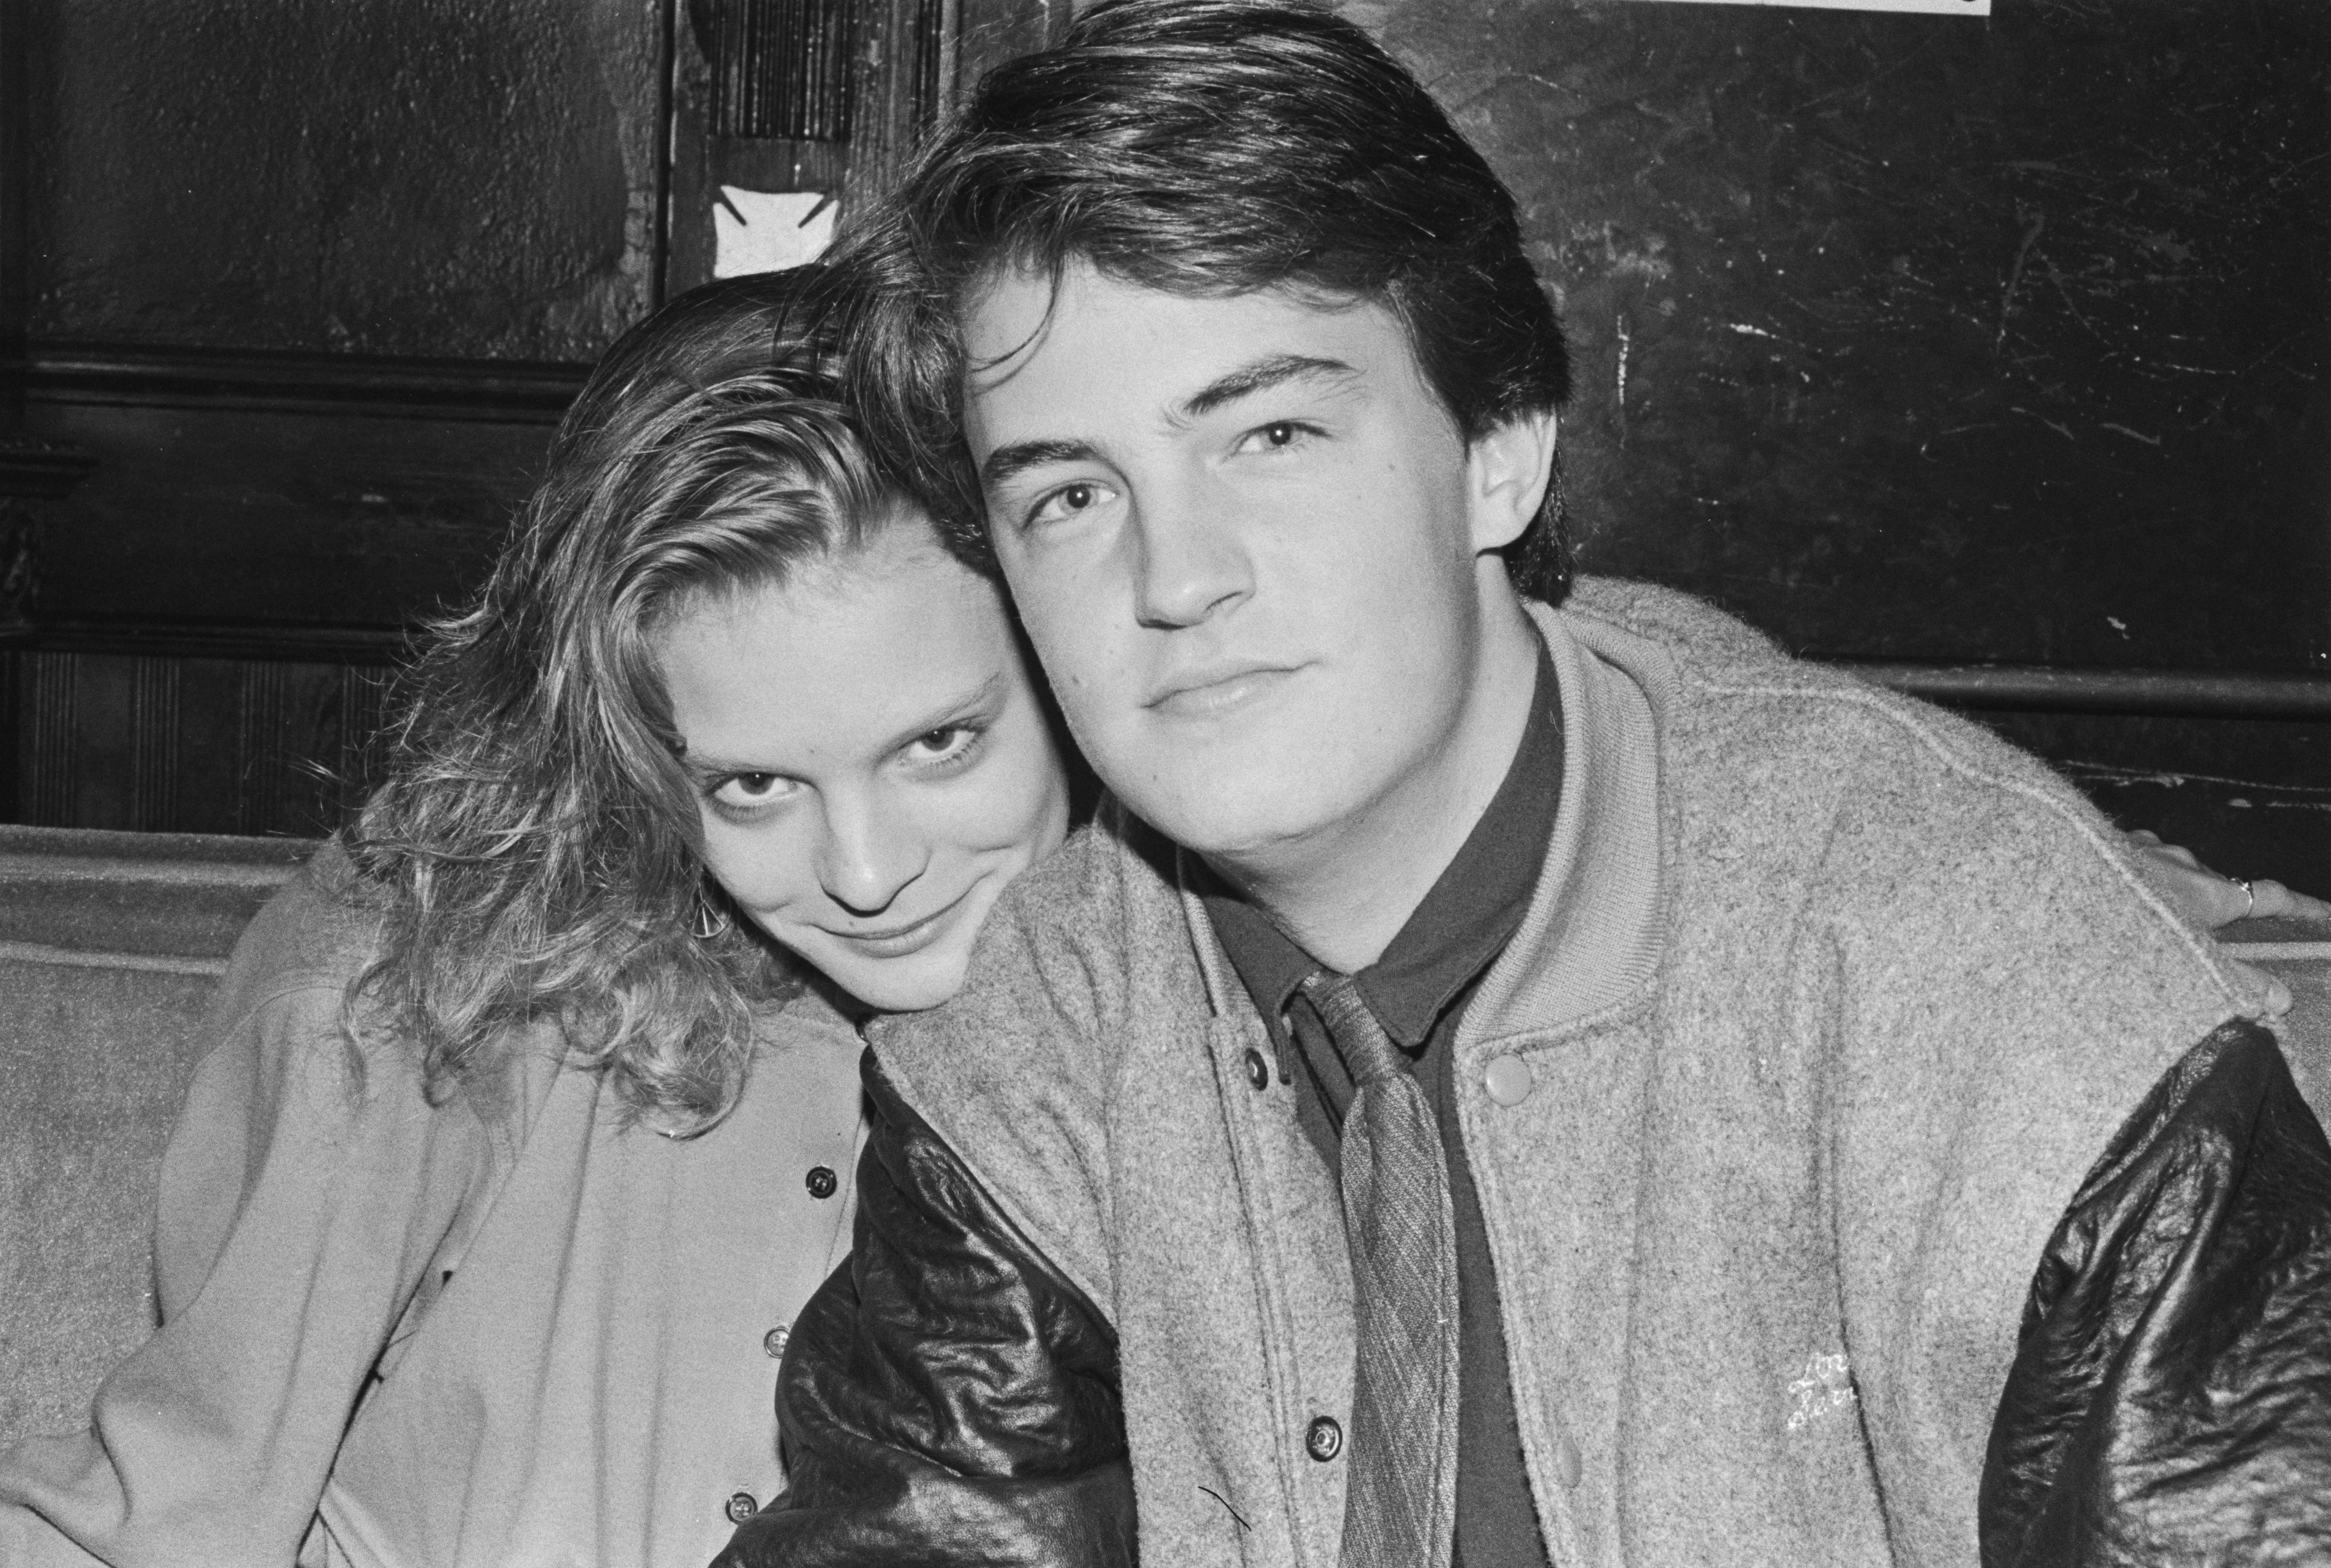 Actors Martha Plimpton and Matthew Perry at the Limelight in New York City, circa 1988. | Source: Getty Images